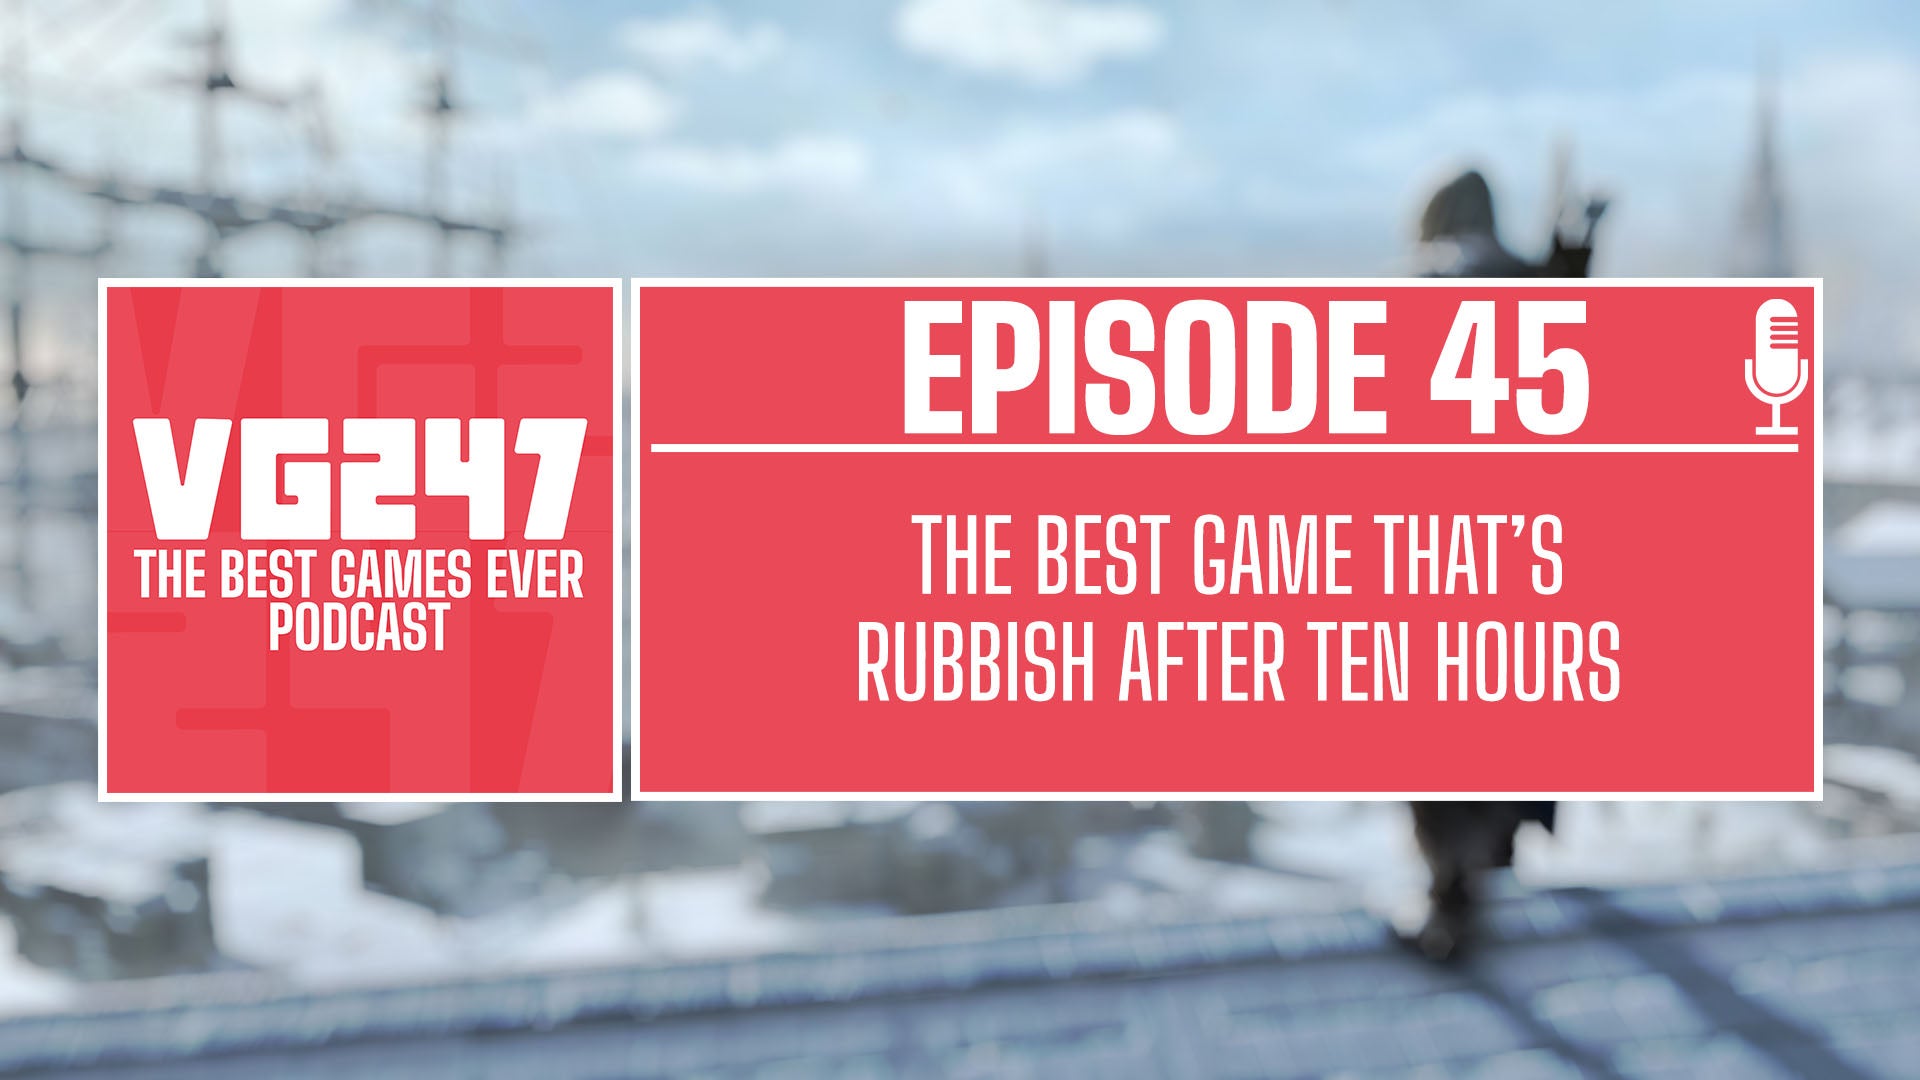 Image for VG247's The Best Games Ever Podcast – Ep.45: The best game that's rubbish after ten hours